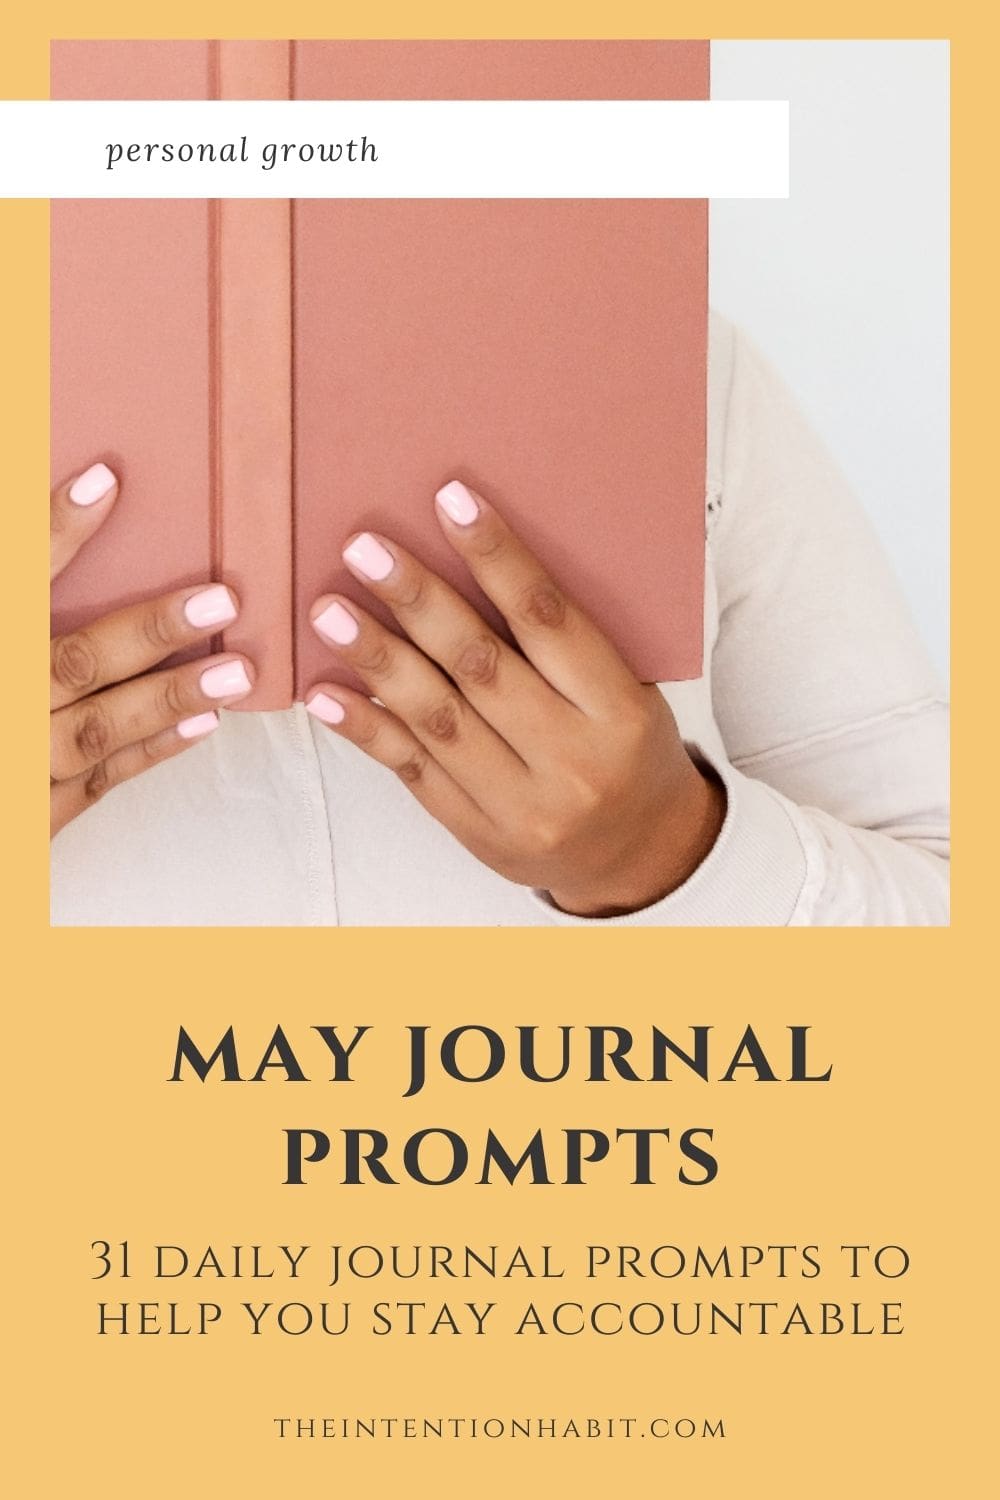 may journal prompts for daily journaling.